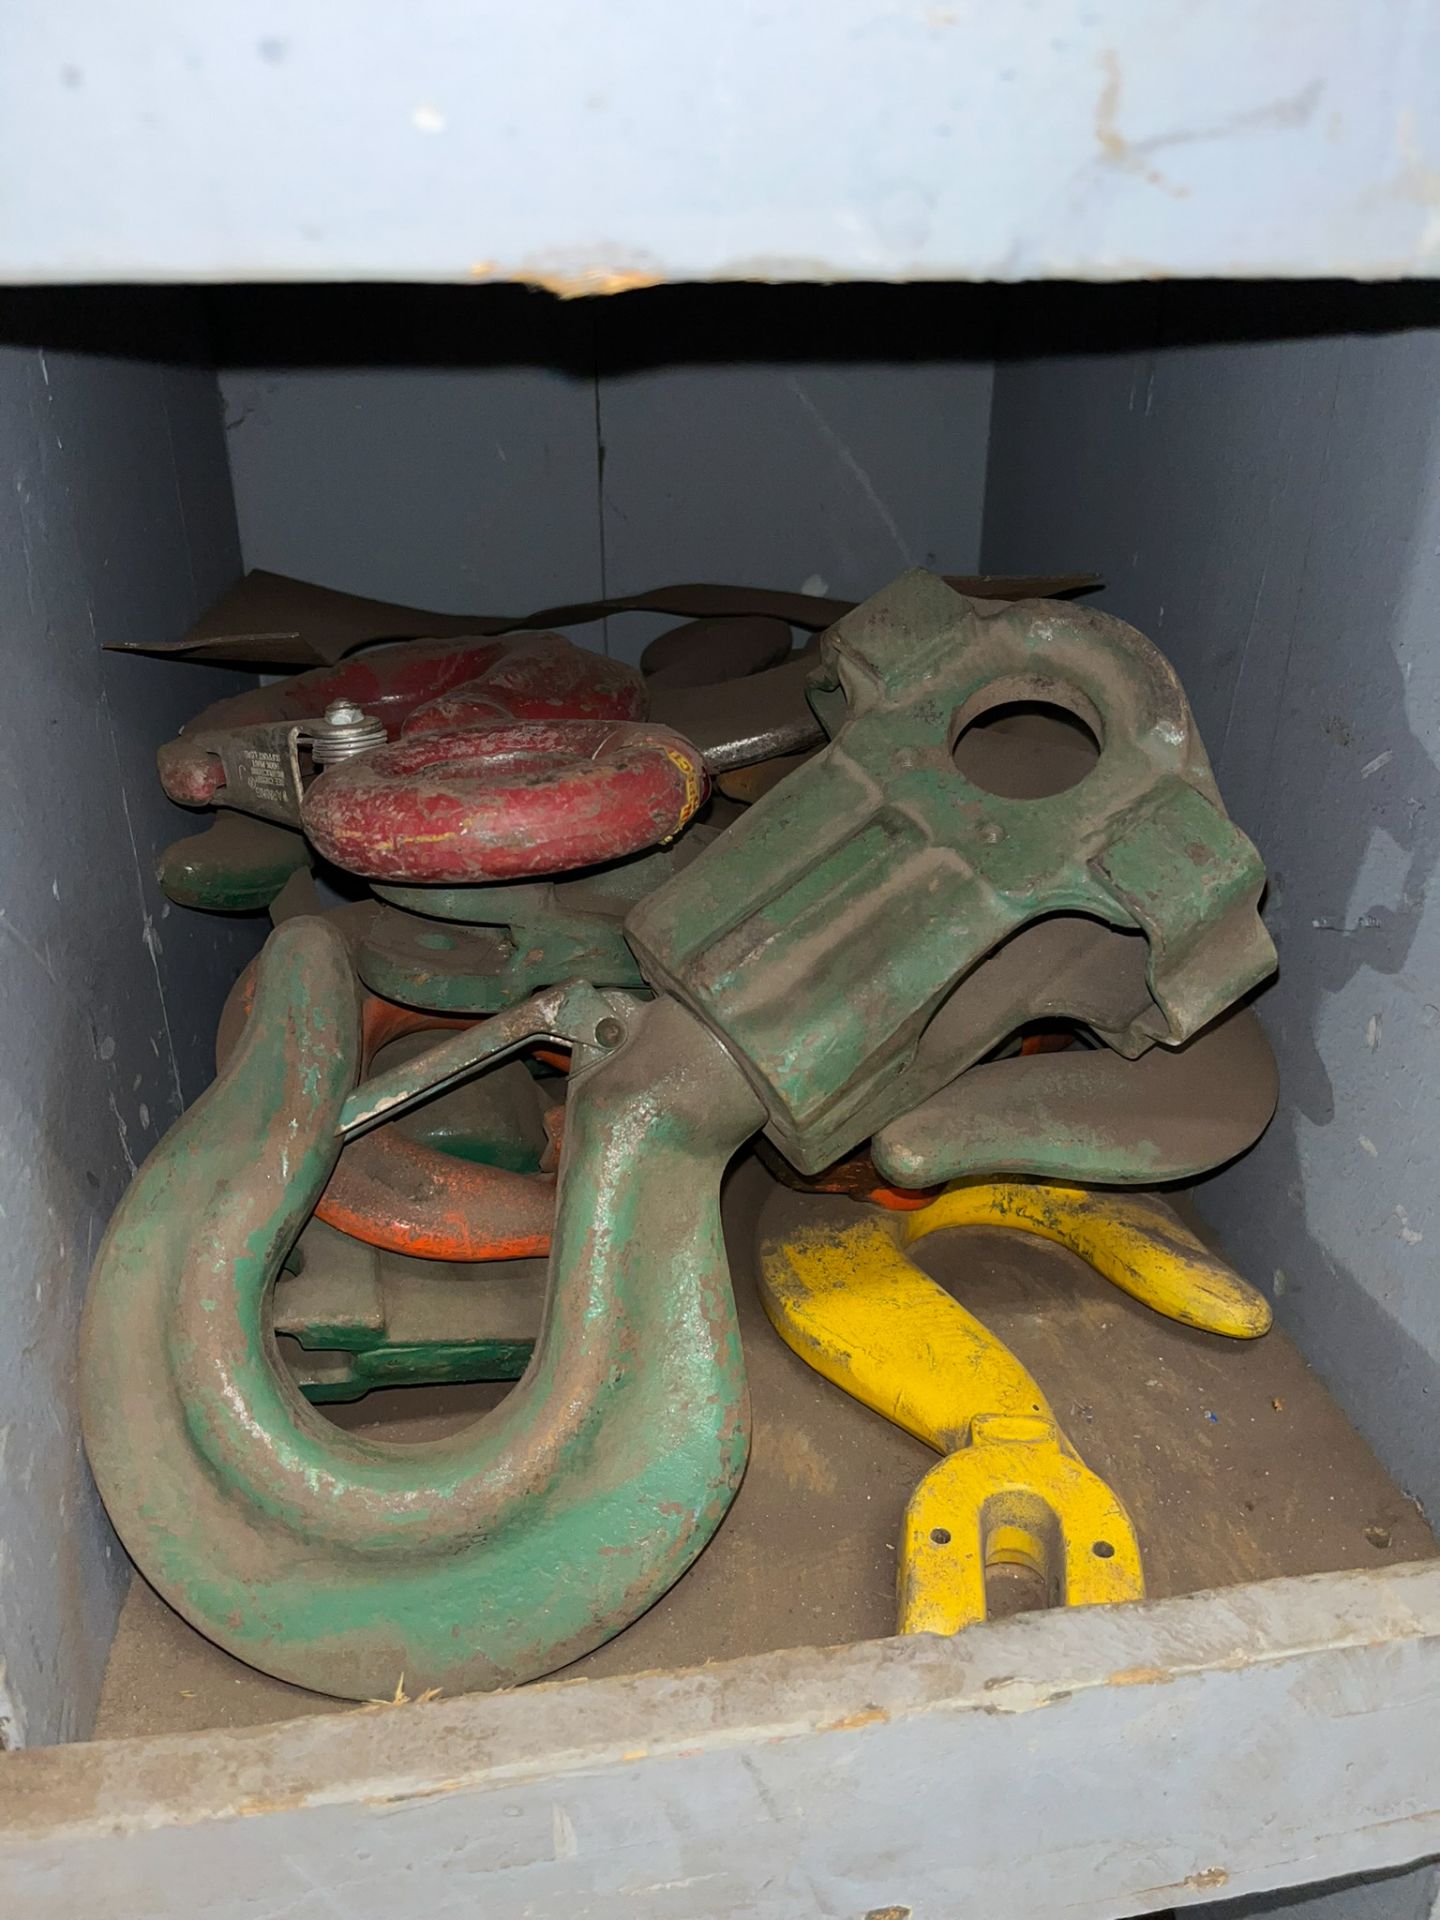 LOT/ CONTENTS OF CABINET - INCLUDING LIFTING HOOKS, MASTER LINKS, CHAINS, ELECTRIC MOTORS - Image 10 of 12